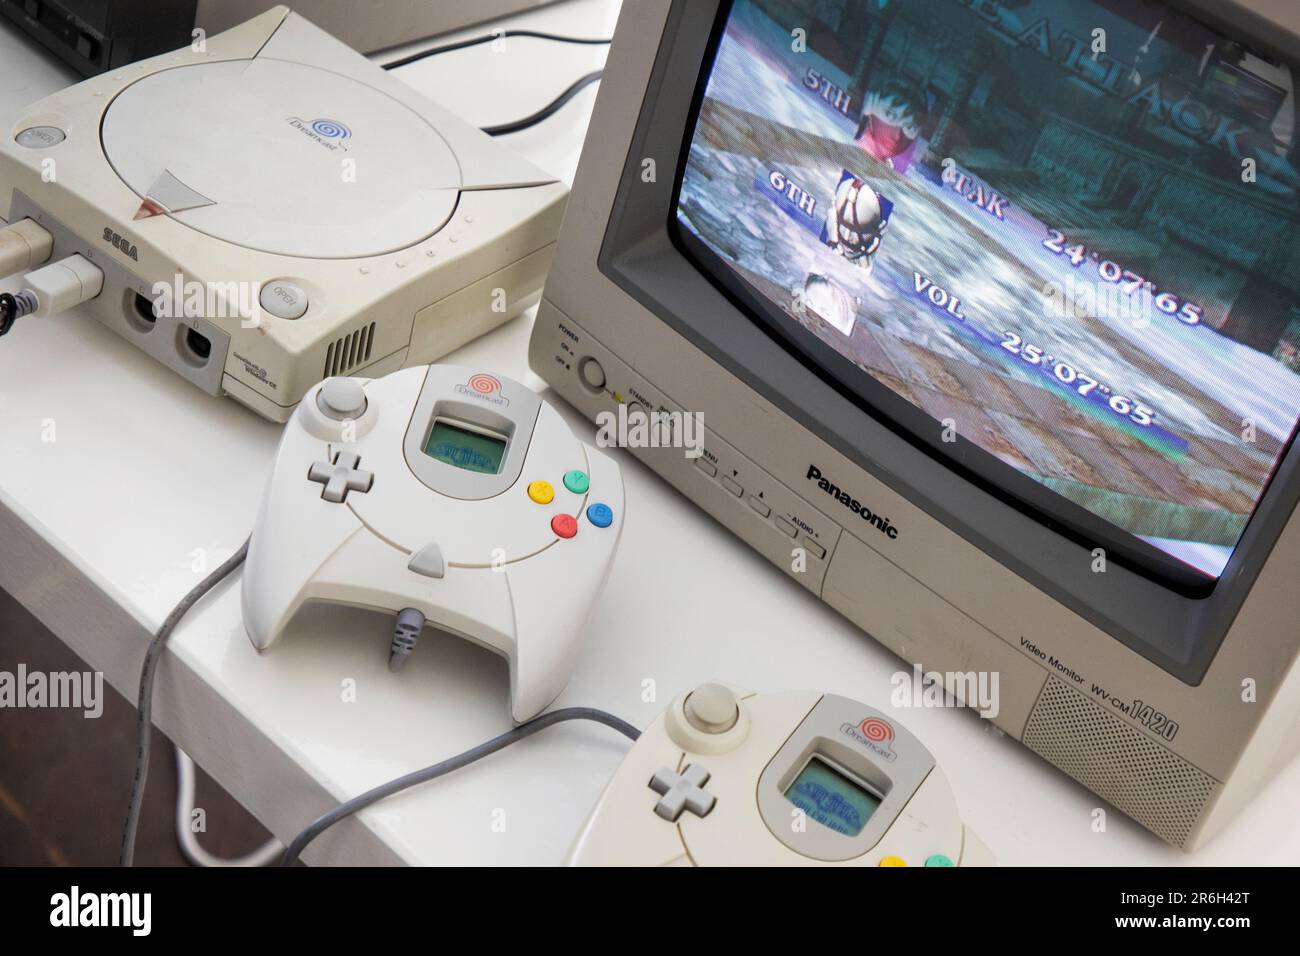 View of Dreamcast home video game console released by Sega Stock Photo